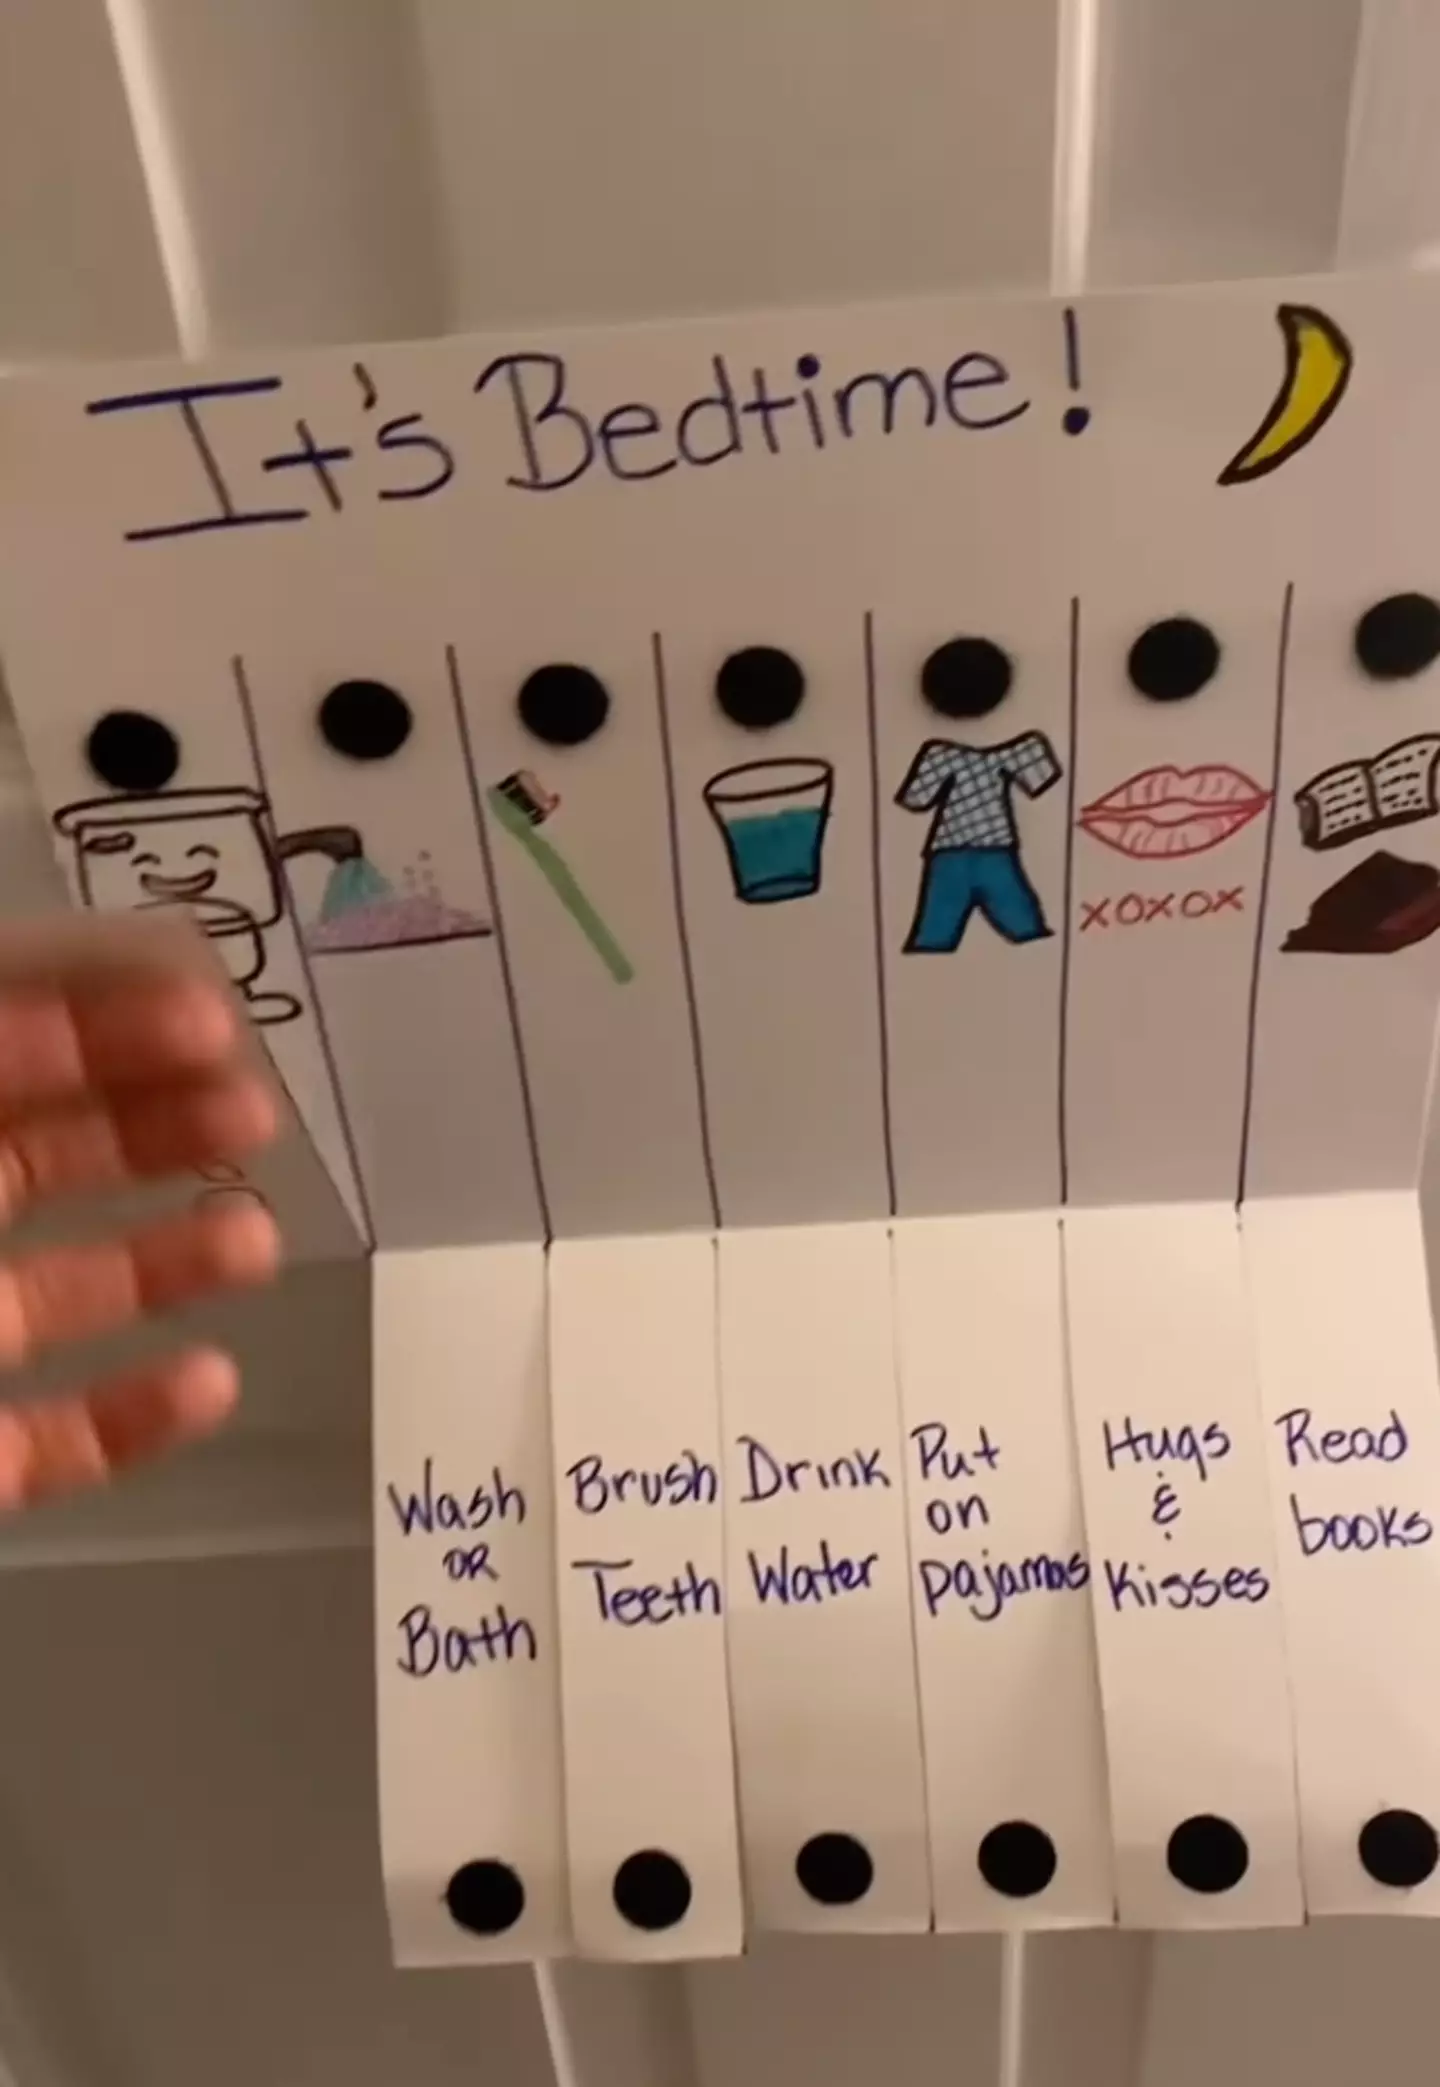 This piece of paper has cut down Lauren's kids' bedtime routines to just 10 minutes.